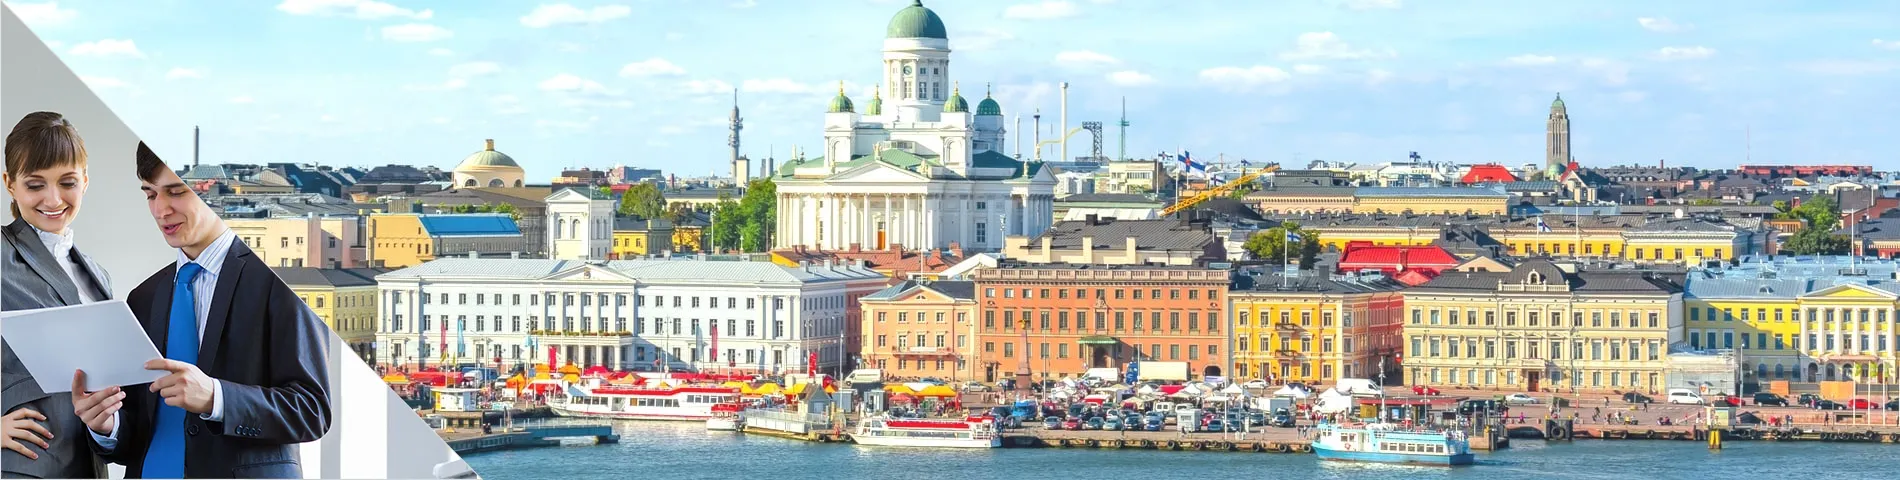 Helsinki - Business One-to-One